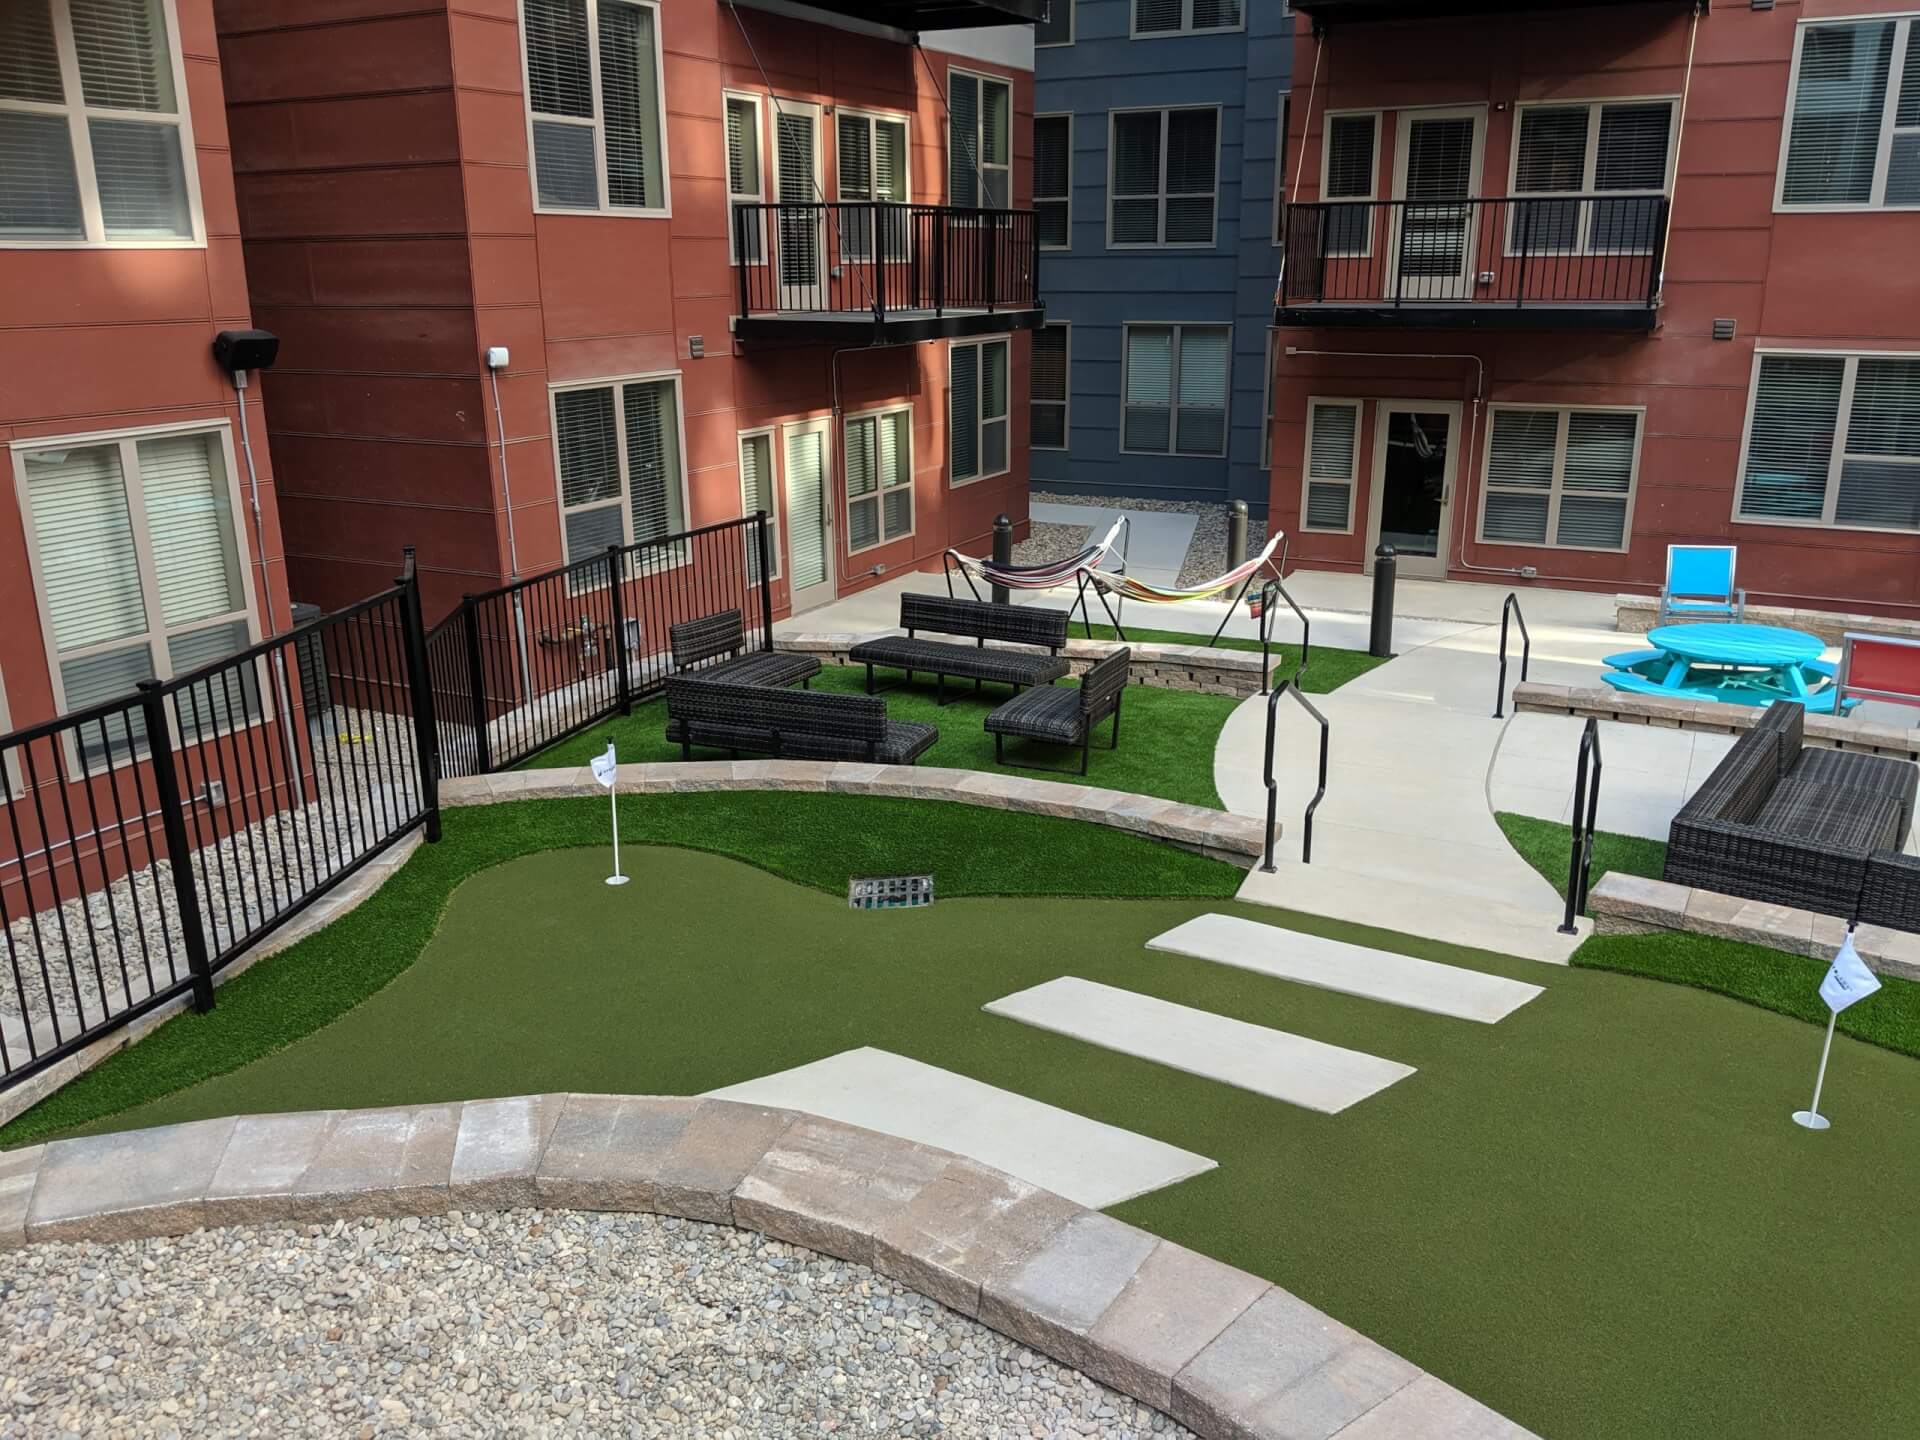 SYNLawn-Columbus-Ohio-Courtyard-Common-Area-puttputt-course-artifical-grass